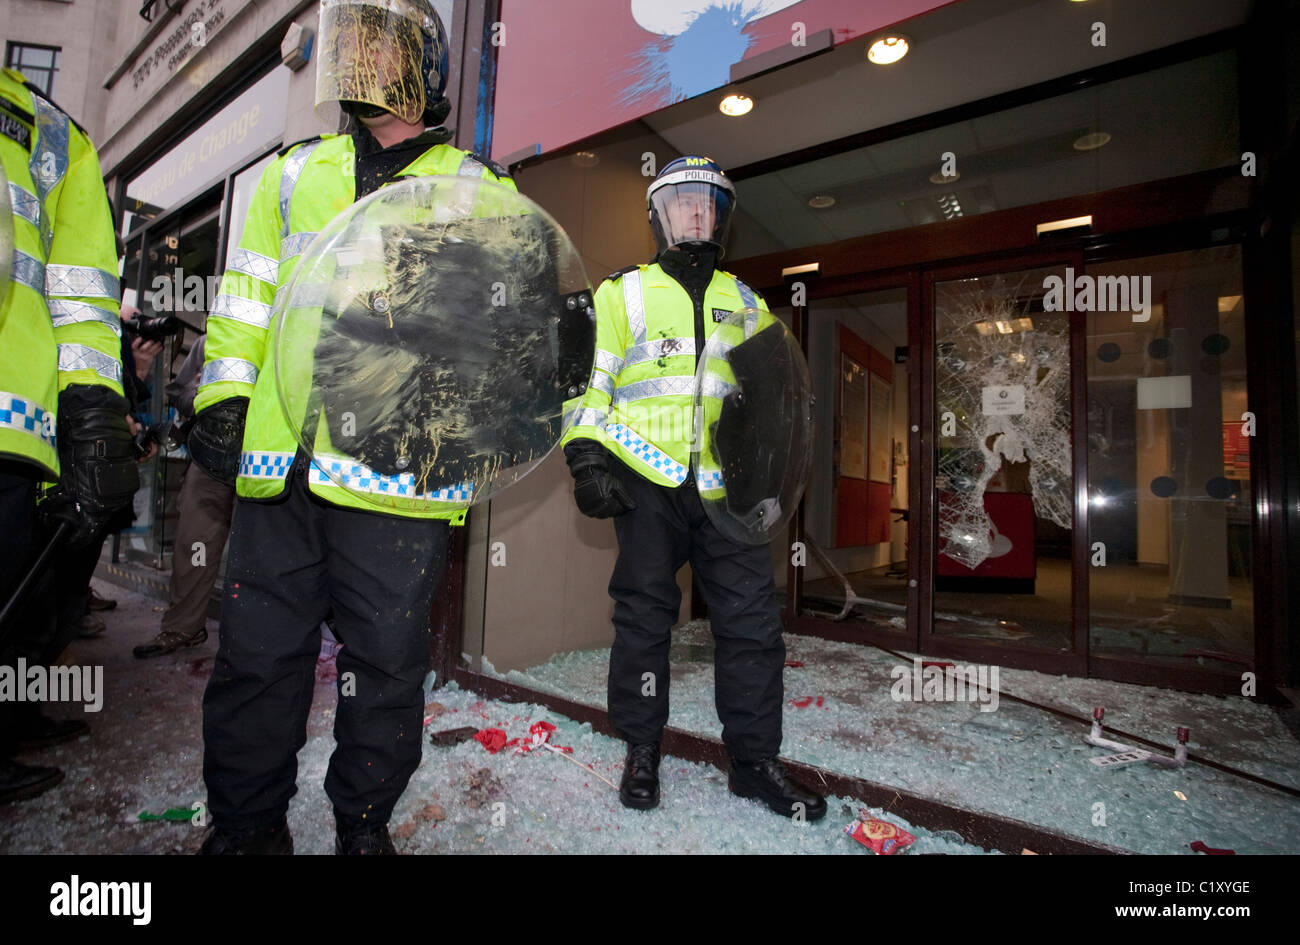 Anti-Cuts march 26/03/2011, London, UK Riot Police outside a ransacked branch of Santander on Piccadilly during violent protest. Stock Photo